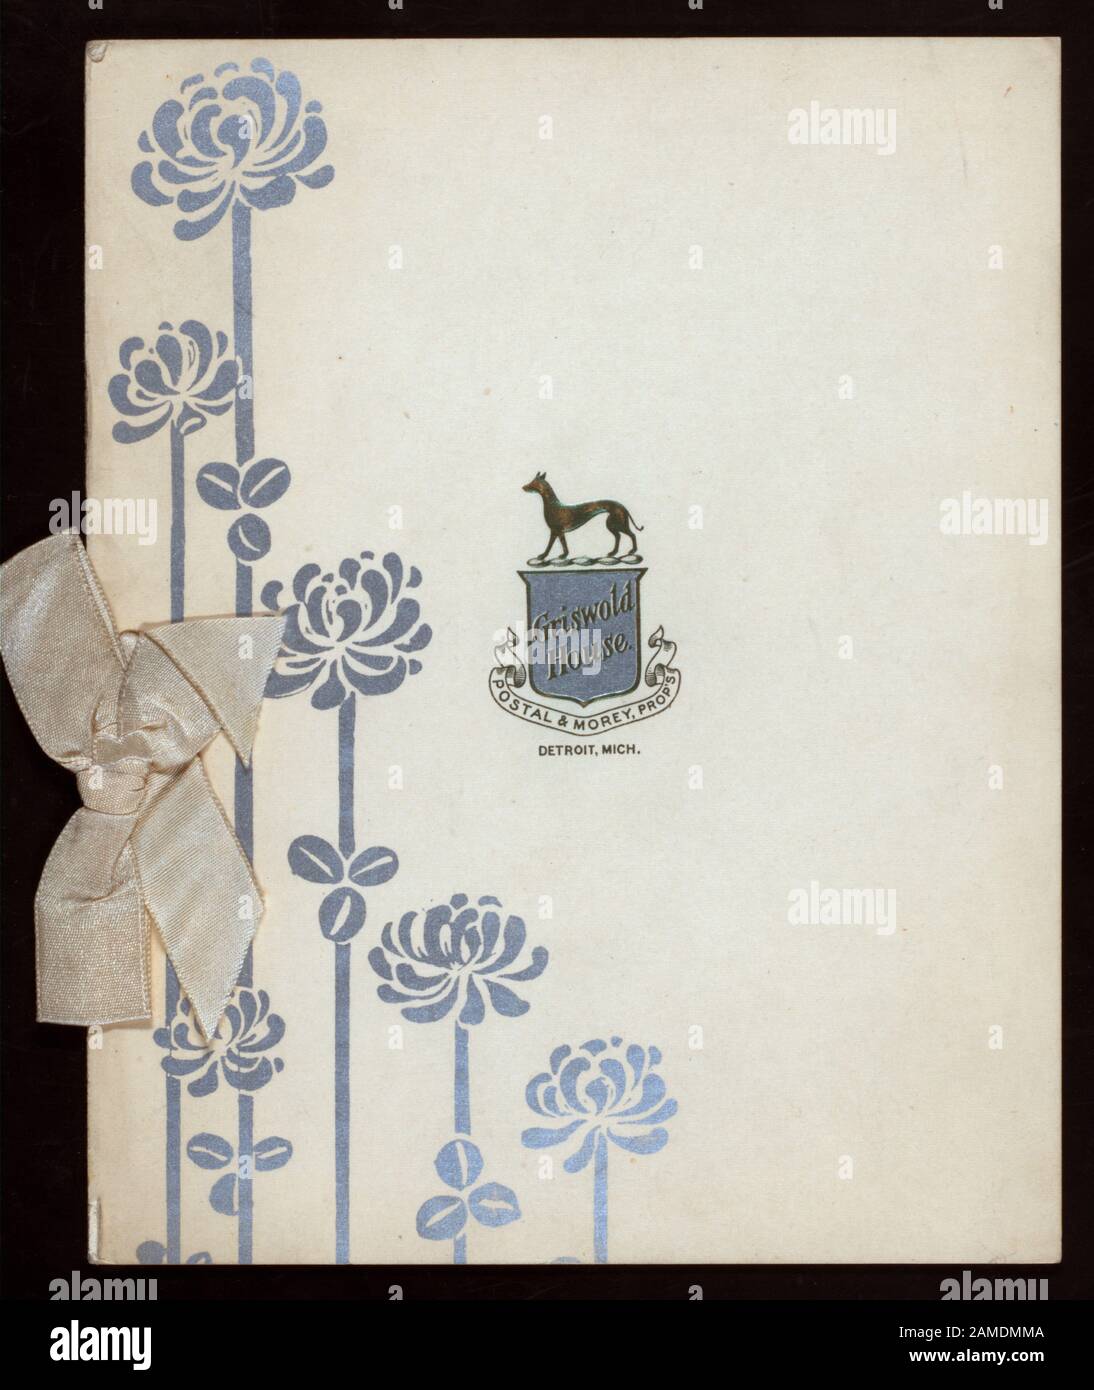 THANKSGIVING DINNER (held by) GRISWOLD HOUSE (at) DETROIT, MI (HOTEL;)  INCLUDES MUSICAL PROGRAM; HOTEL SEAL ON COVER; SILK RIBBON ATTACHMENT; THANKSGIVING DINNER [held by] GRISWOLD HOUSE [at] DETROIT, MI (HOTEL;) Stock Photo